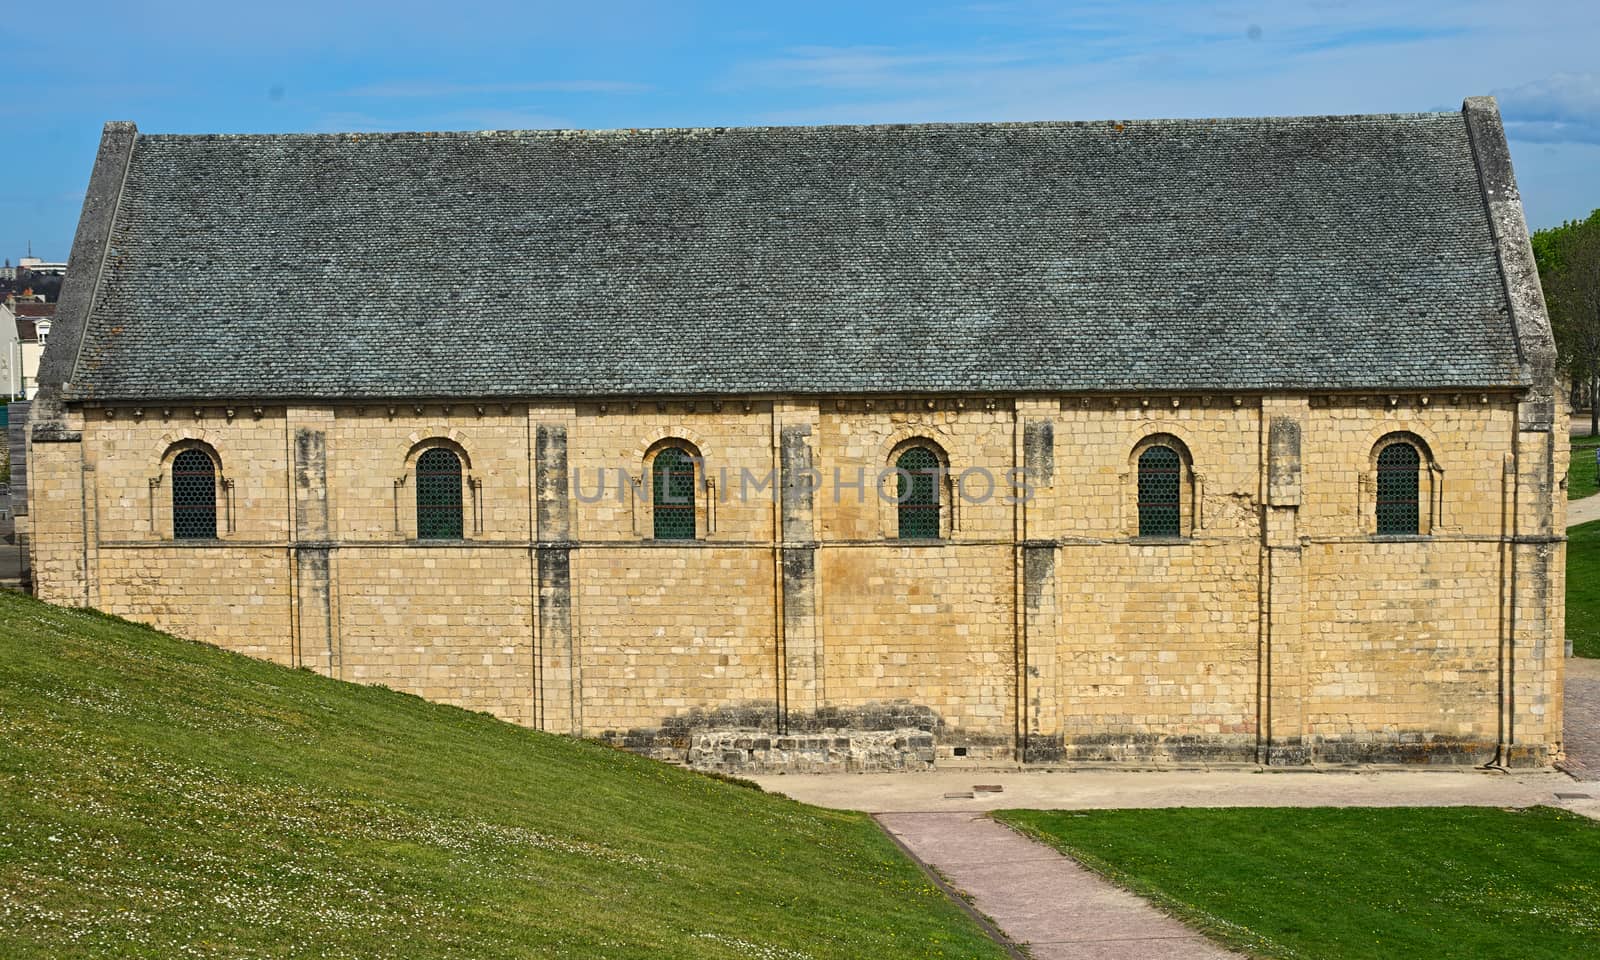 Side view on gothic style catholic church at Caen fortress